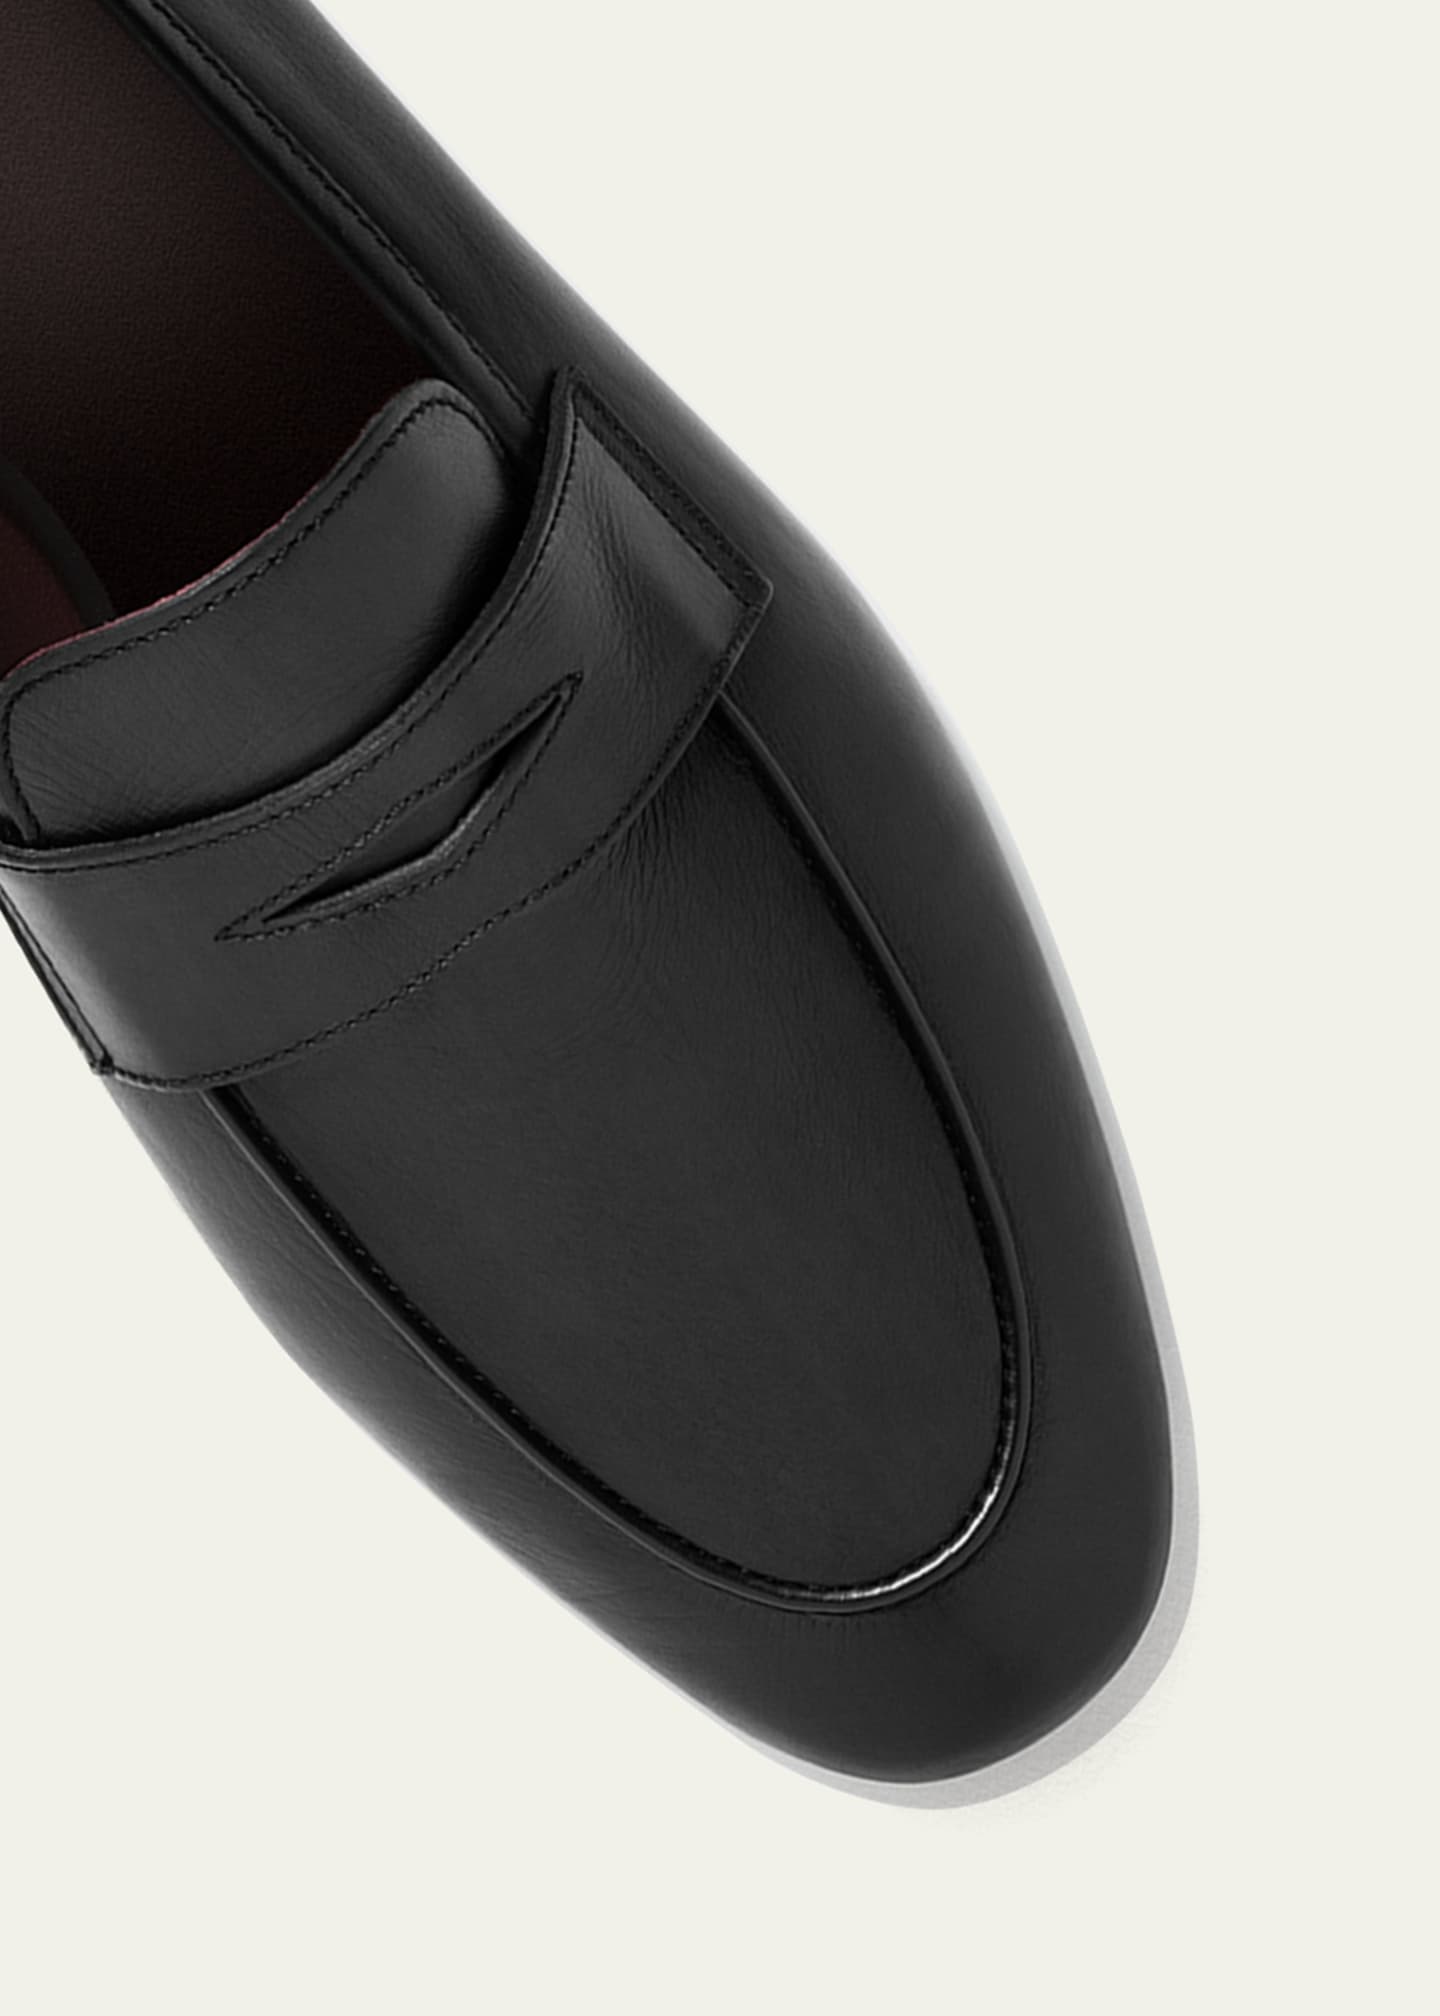 Bougeotte Flaneur Leather Flat Penny Loafers - Bergdorf Goodman